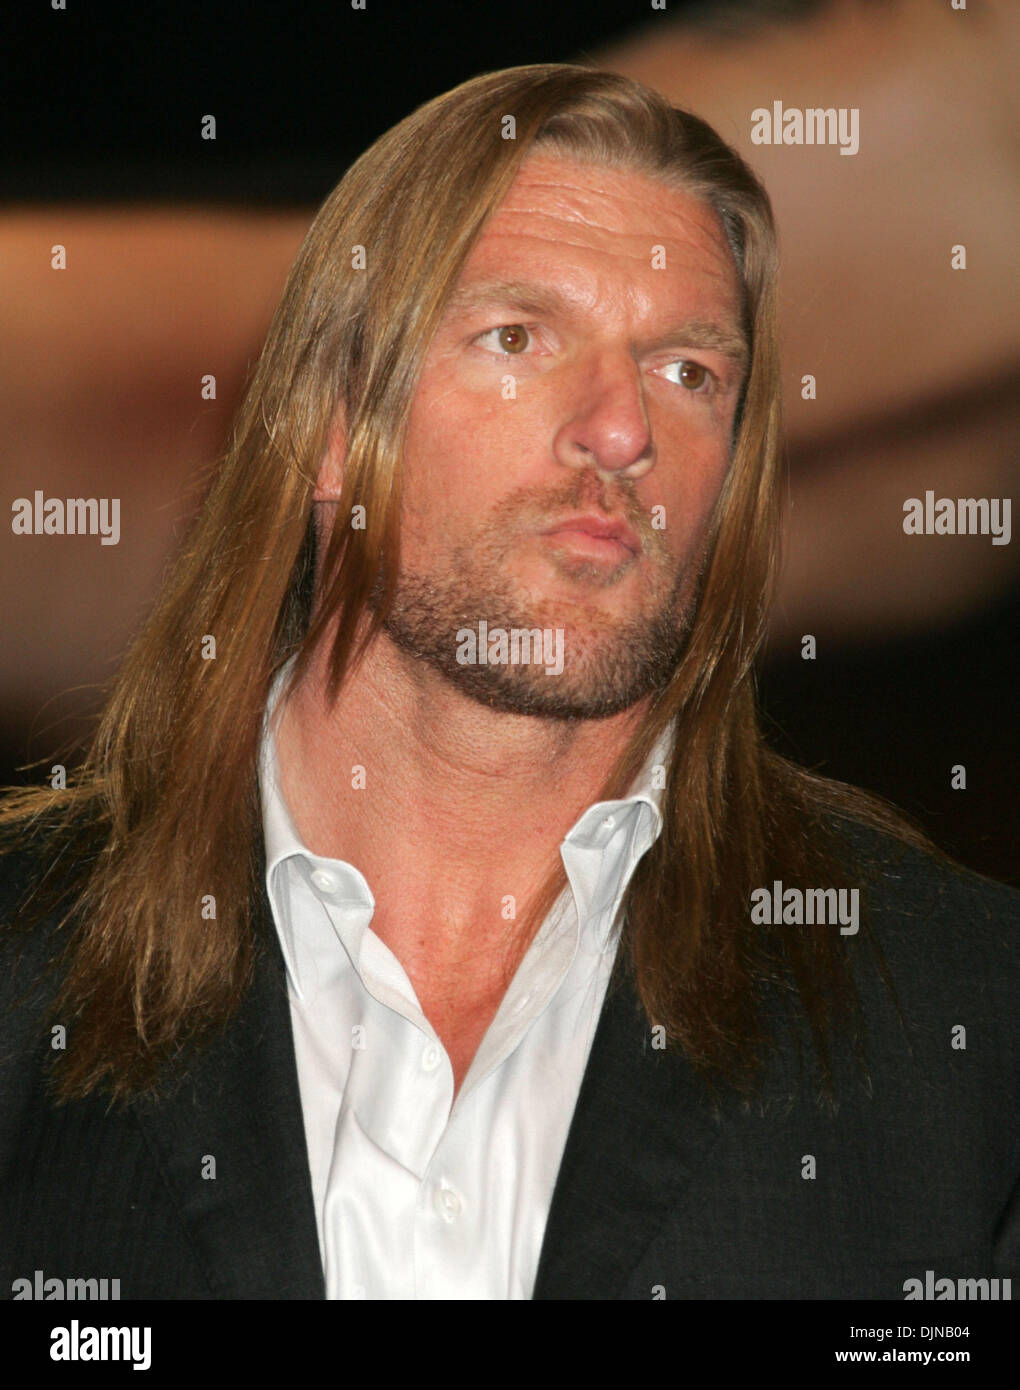 Mar 26, 2008 - New York, NY, USA - Former WWE Champion TRIPLE H at the  press conference